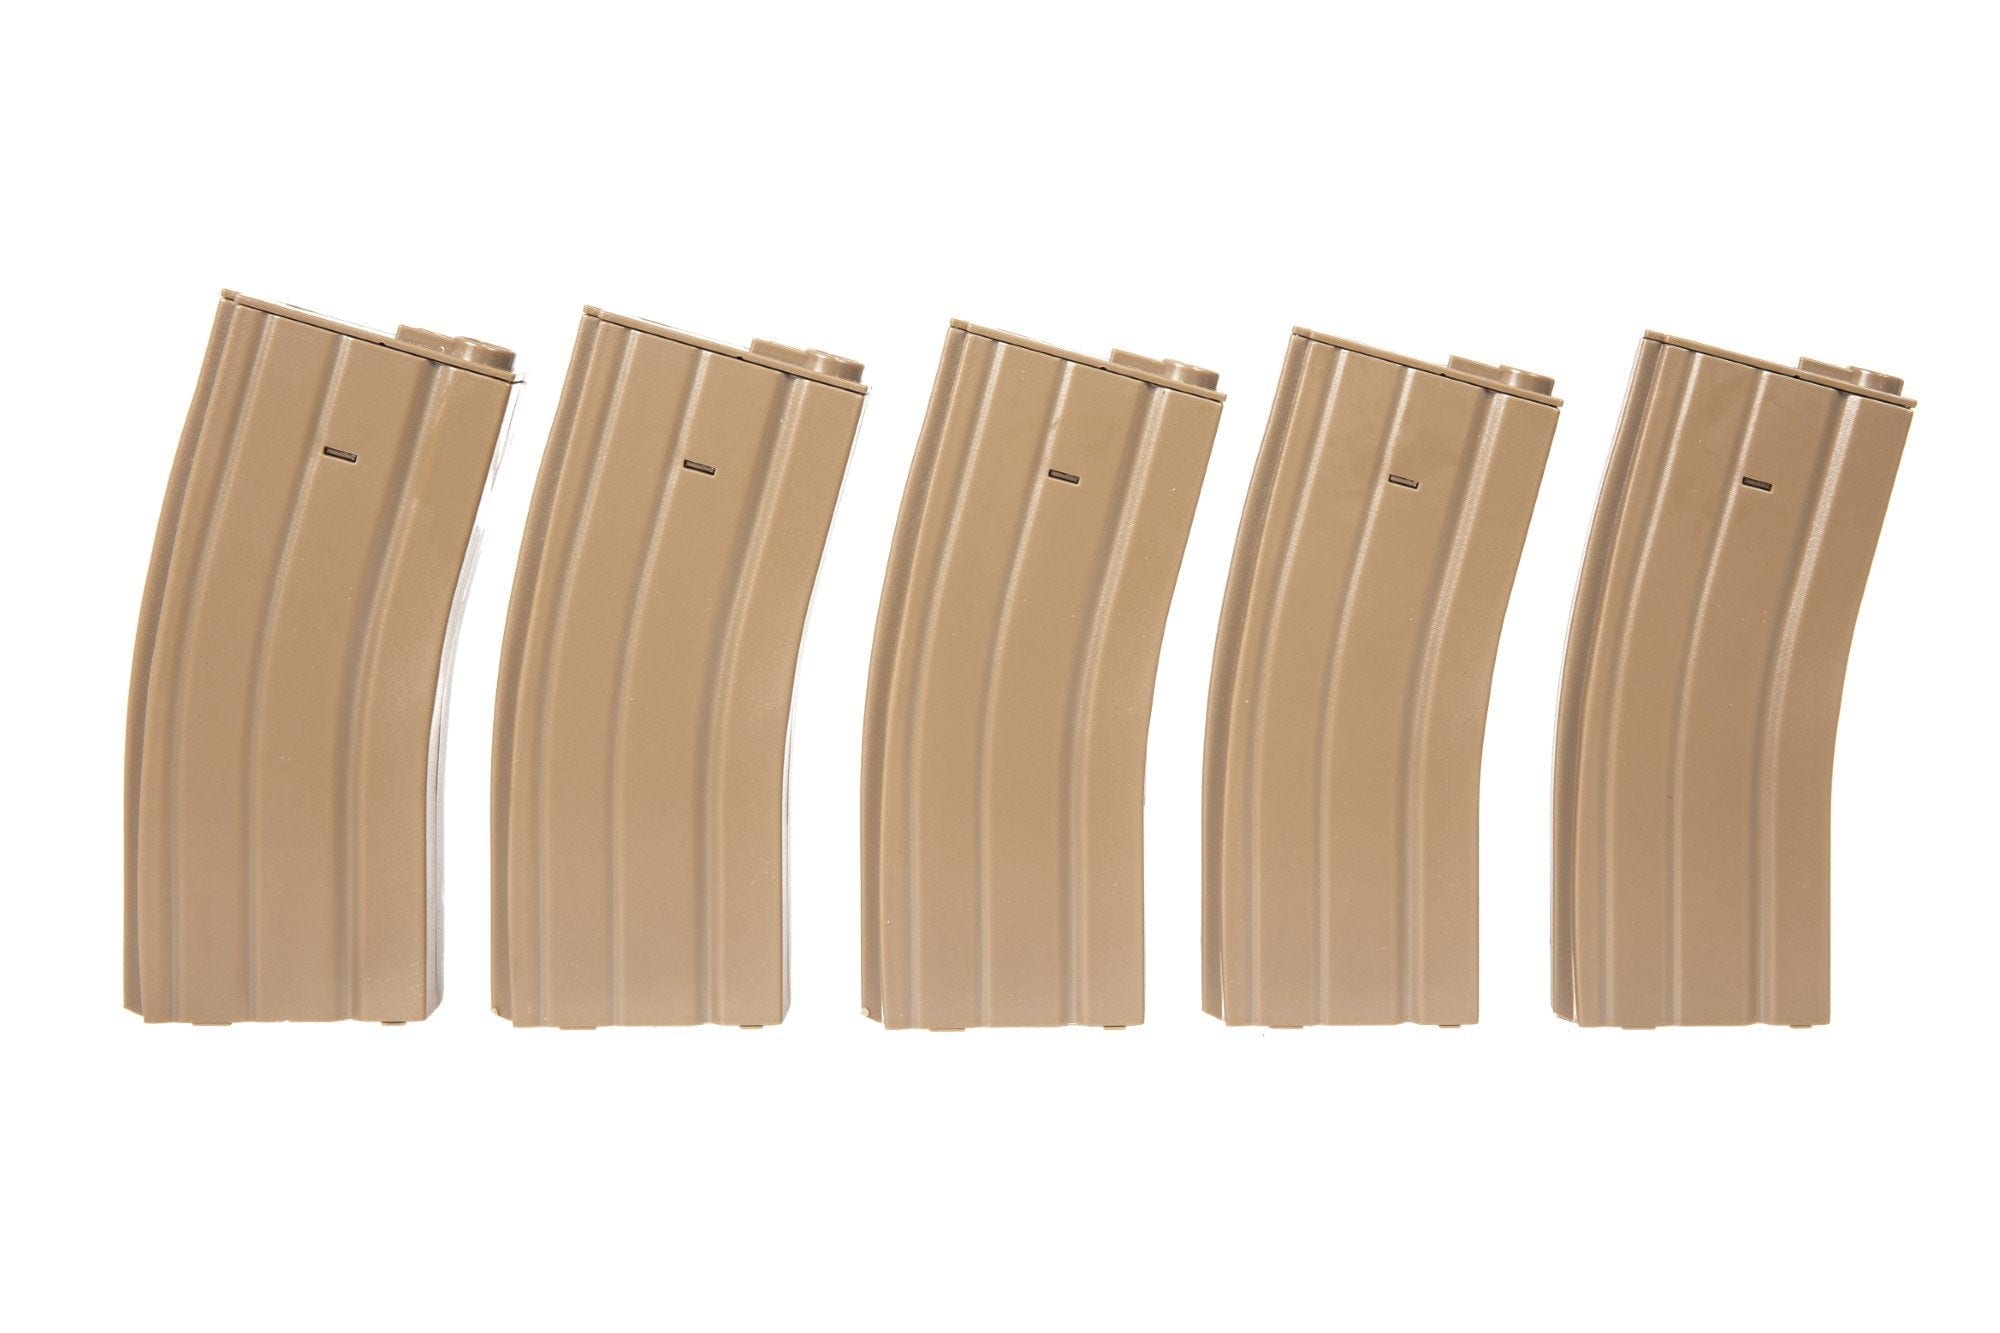 5pcs set - Mid-Cap 100rd Magazine for M4 / M16 - tan by Specna Arms on Airsoft Mania Europe